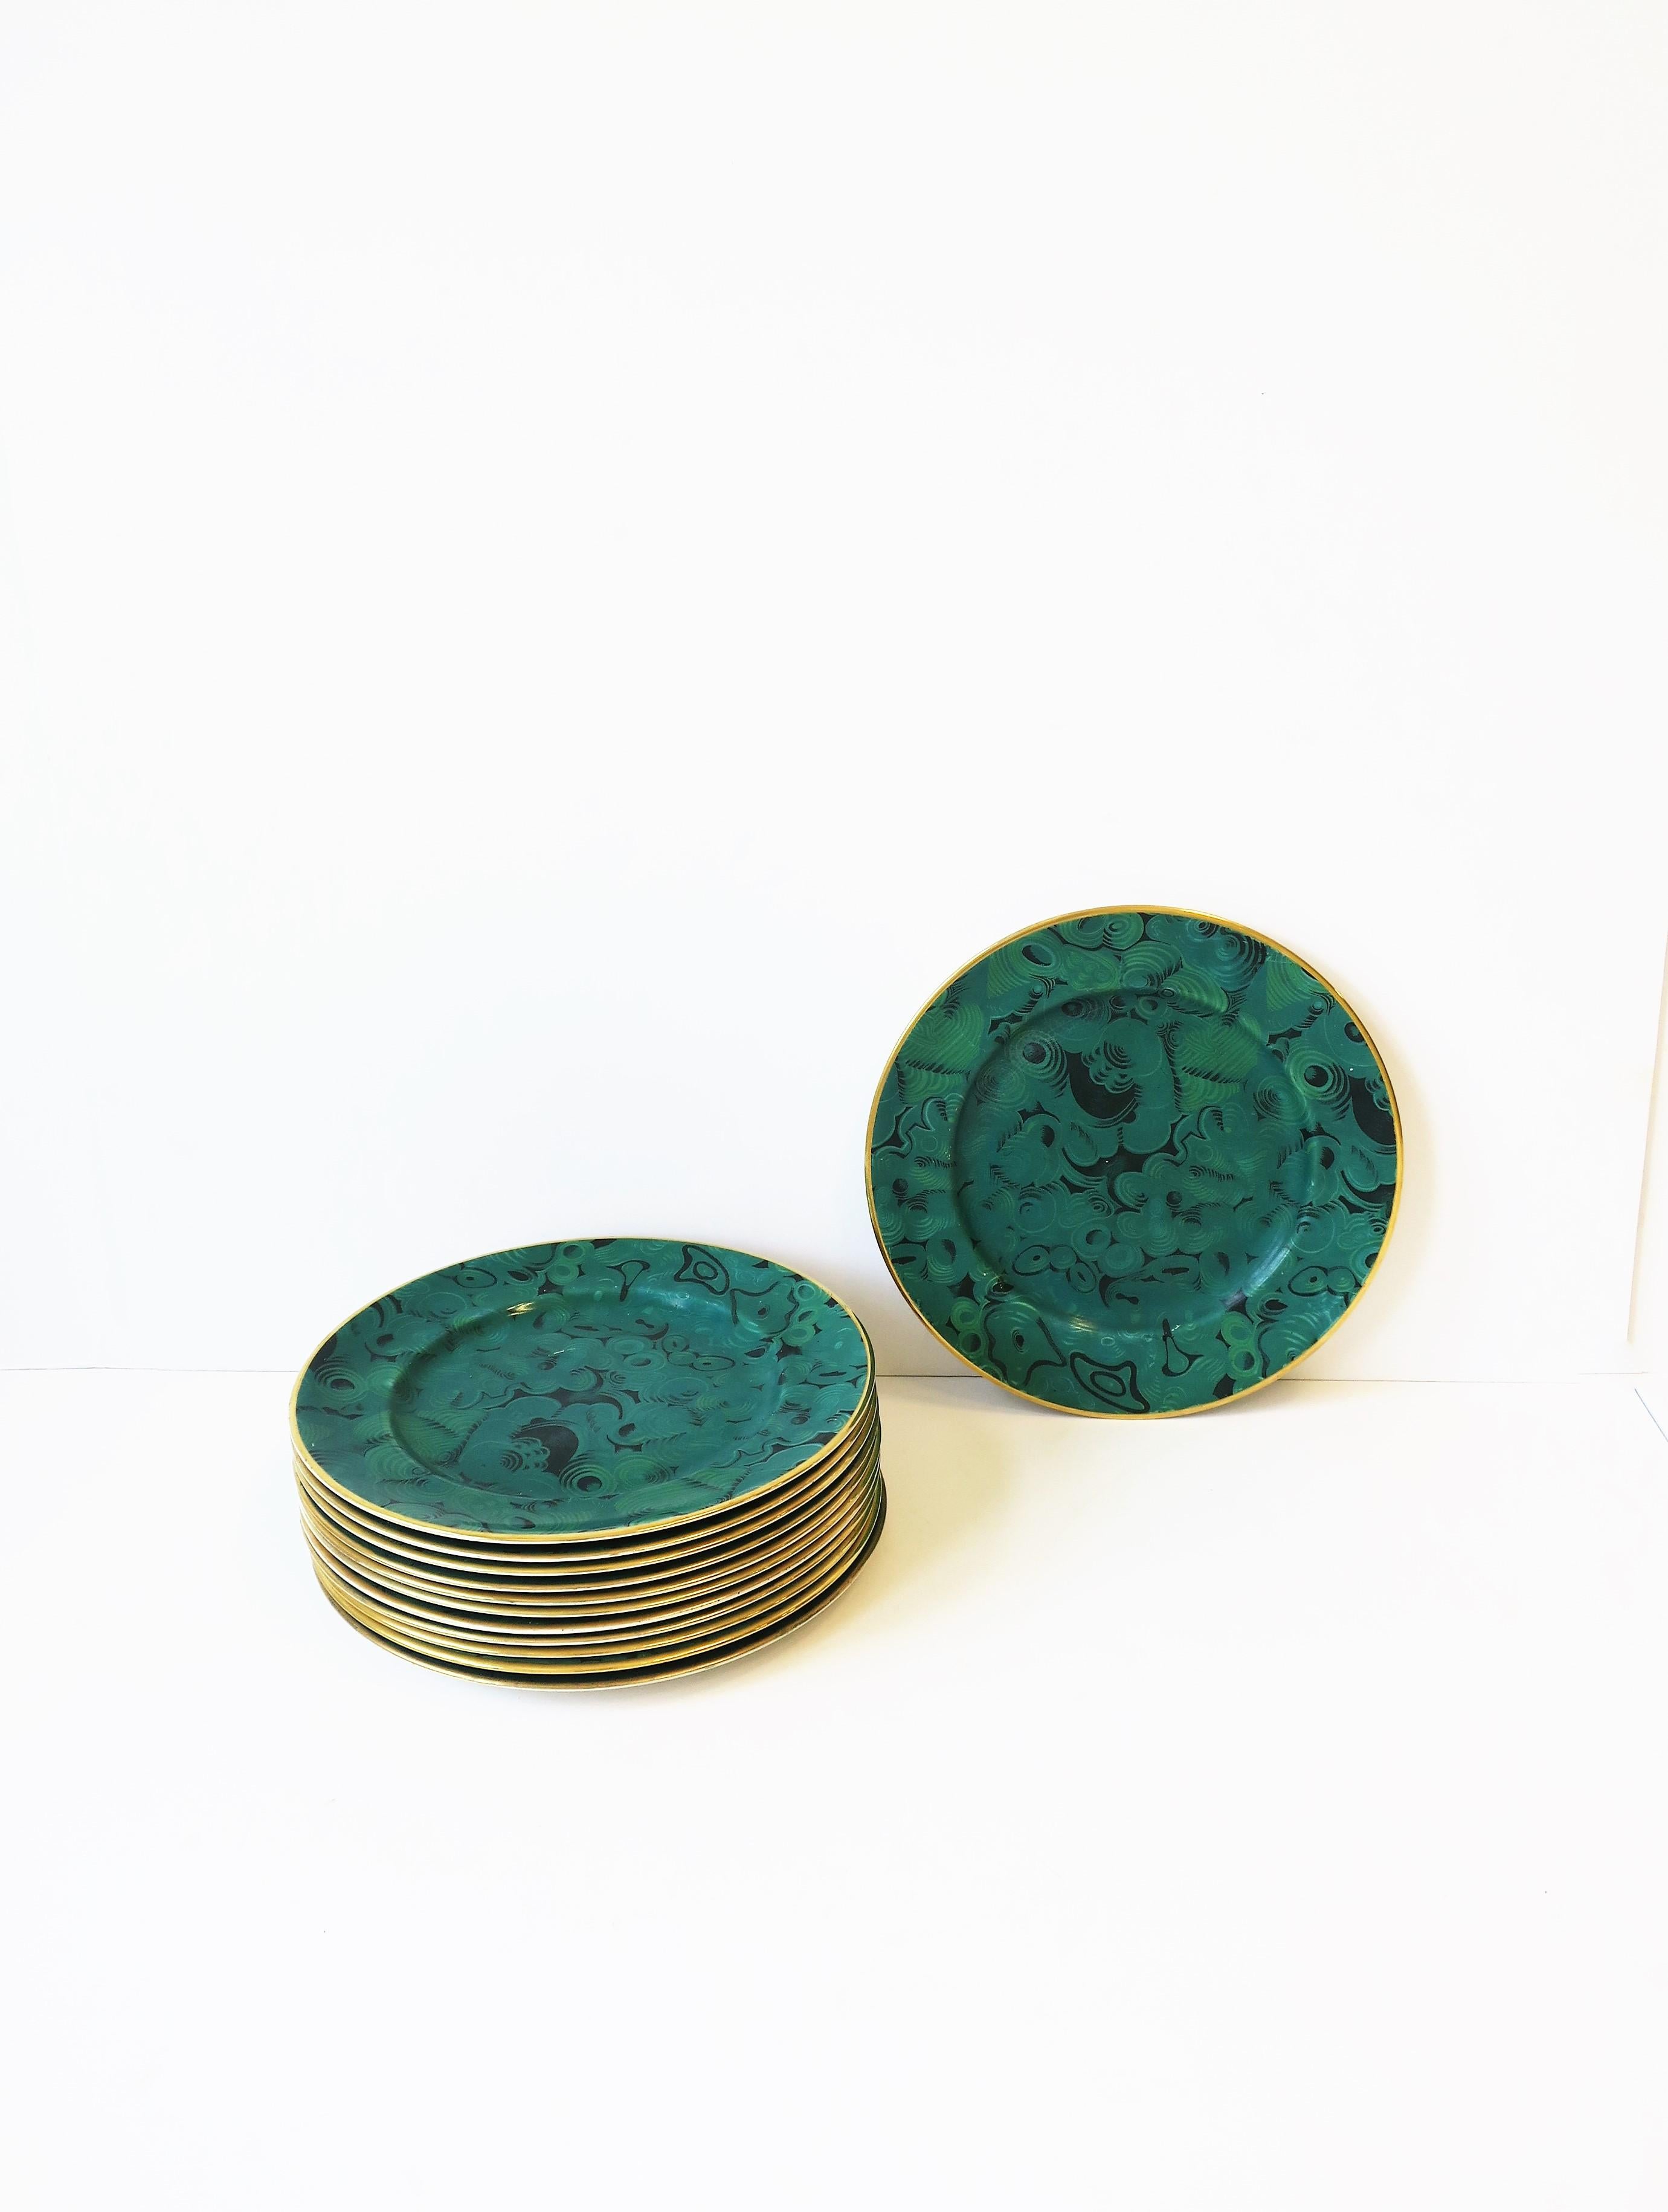 A beautiful and rare set of twelve (12) English Portmeirion green Malachite and gold dinner plates, 20th century, 1960, England, by renowned British Designer, Susan Williams-Ellis. Dinner plate has a 22ct gold decorative gilding around edge. On